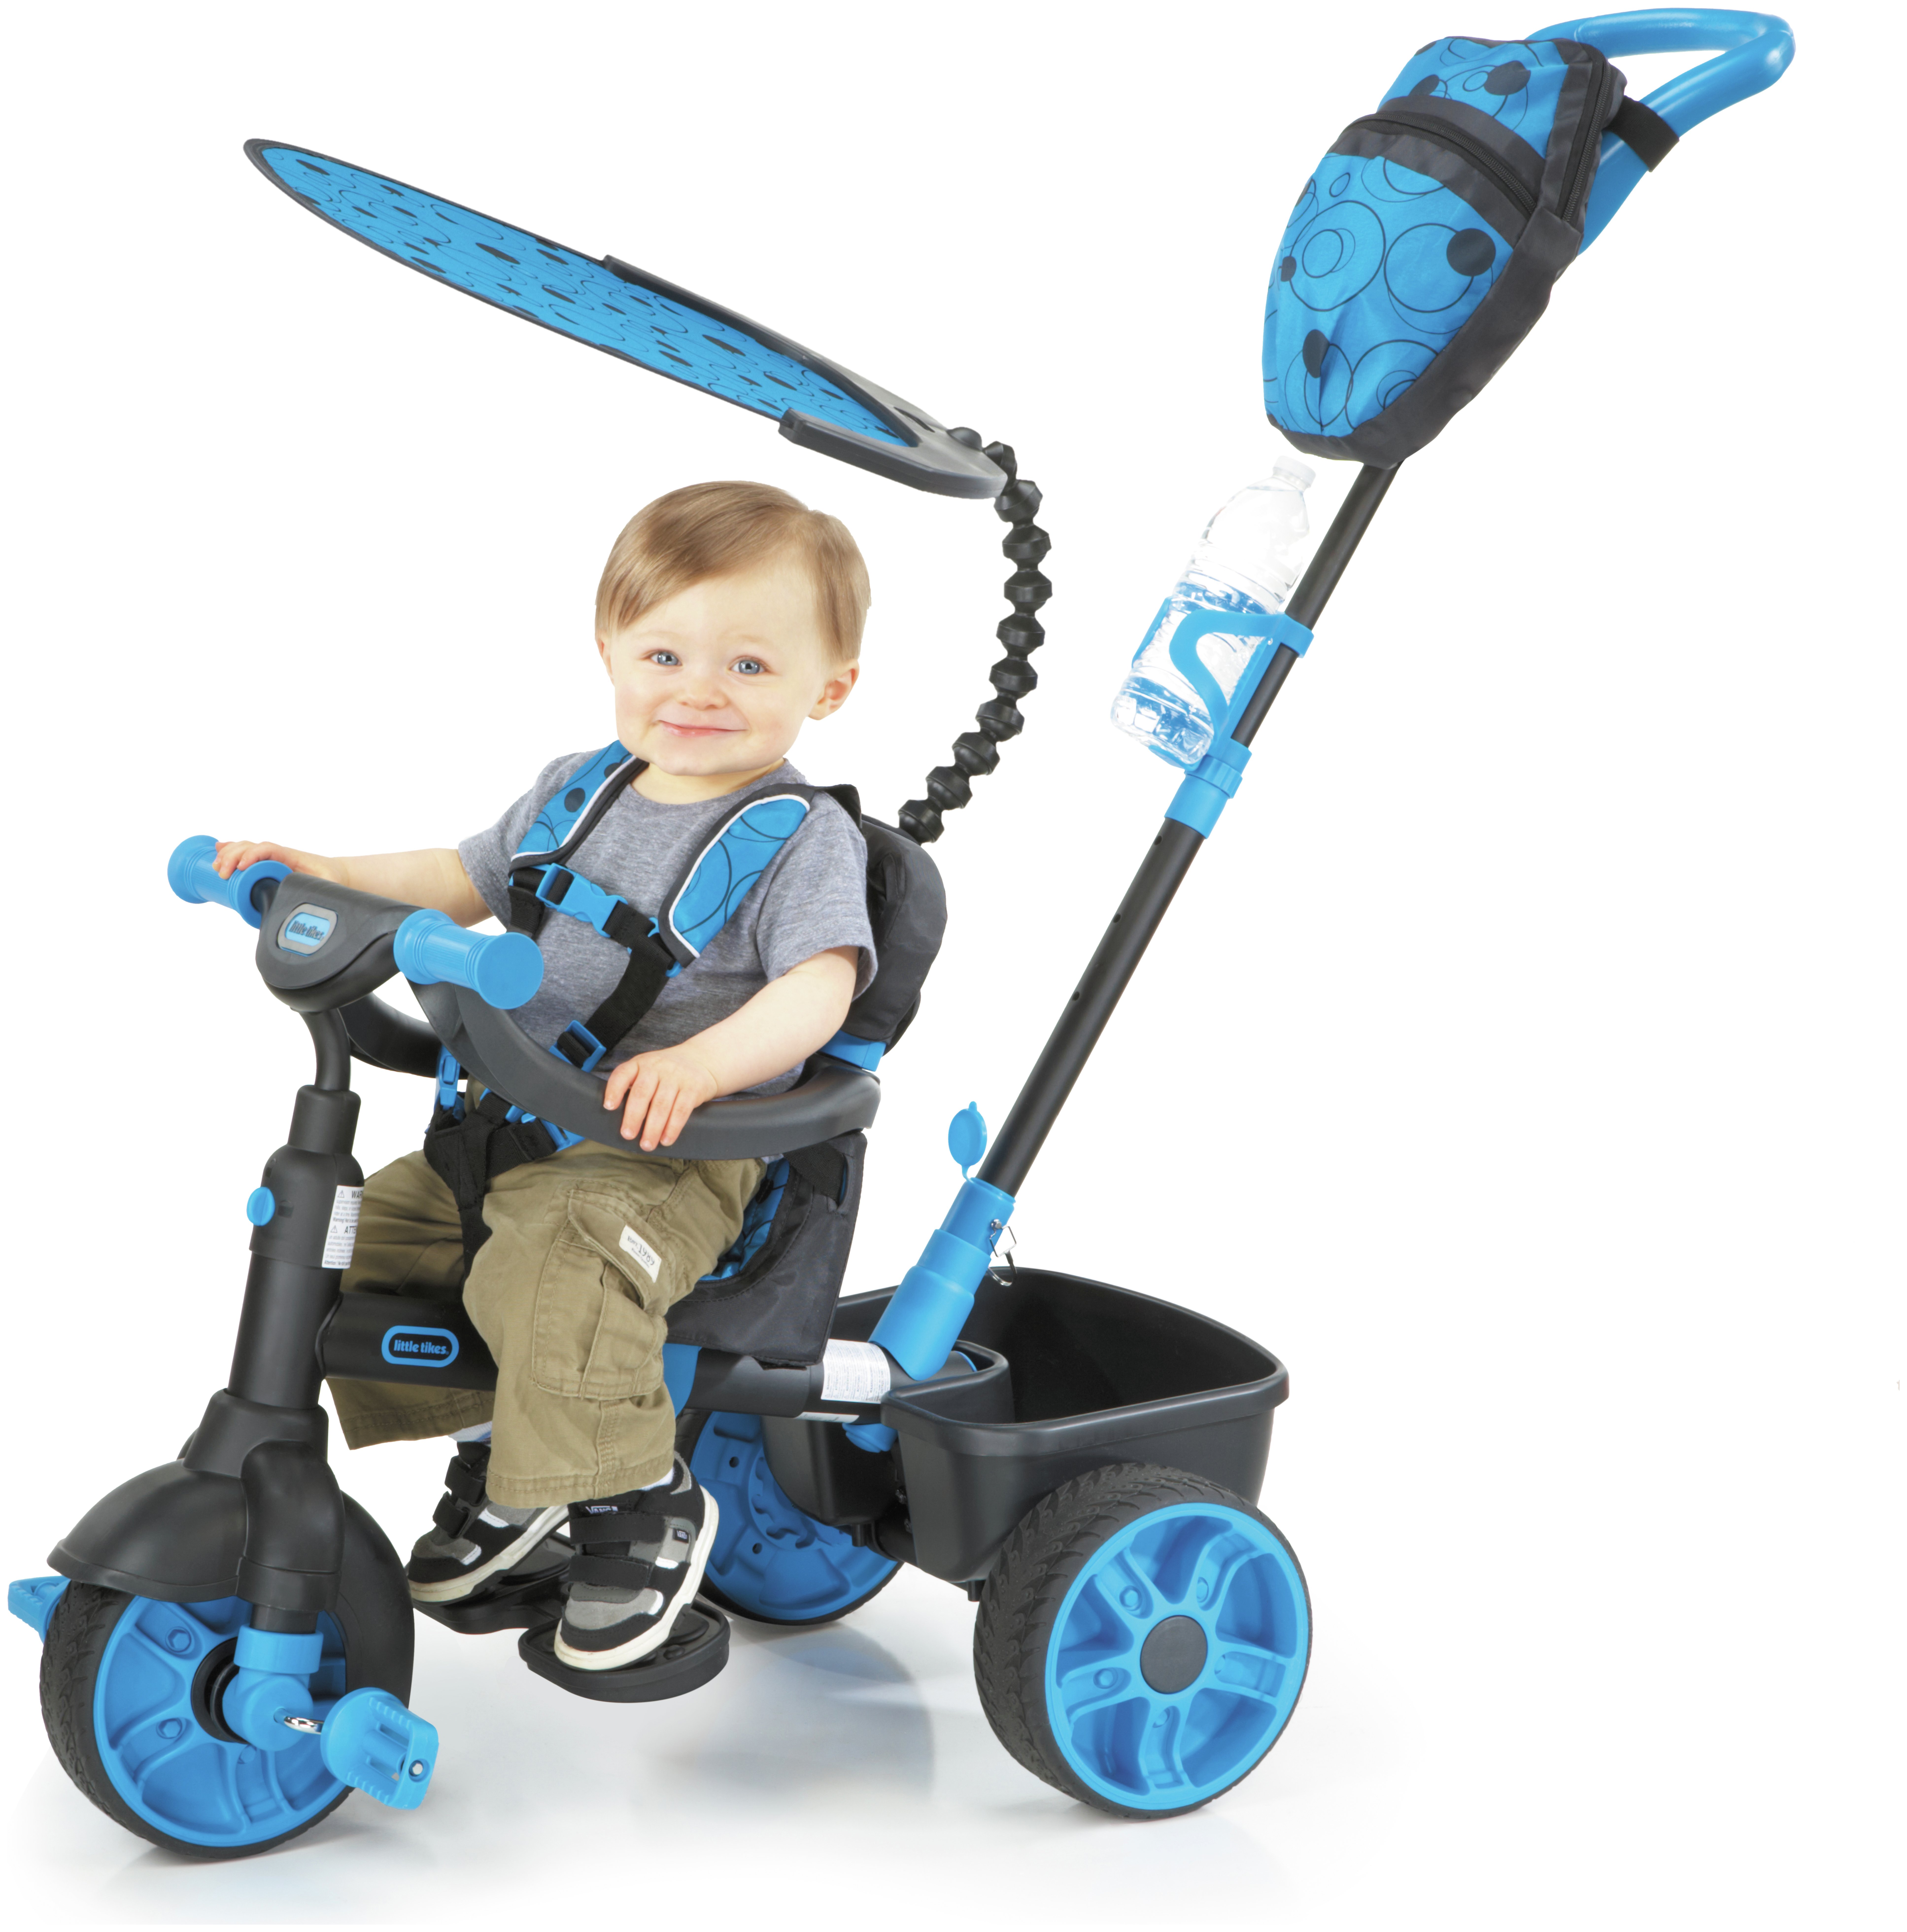 Little Tikes 4-in-1 Deluxe Trike Review